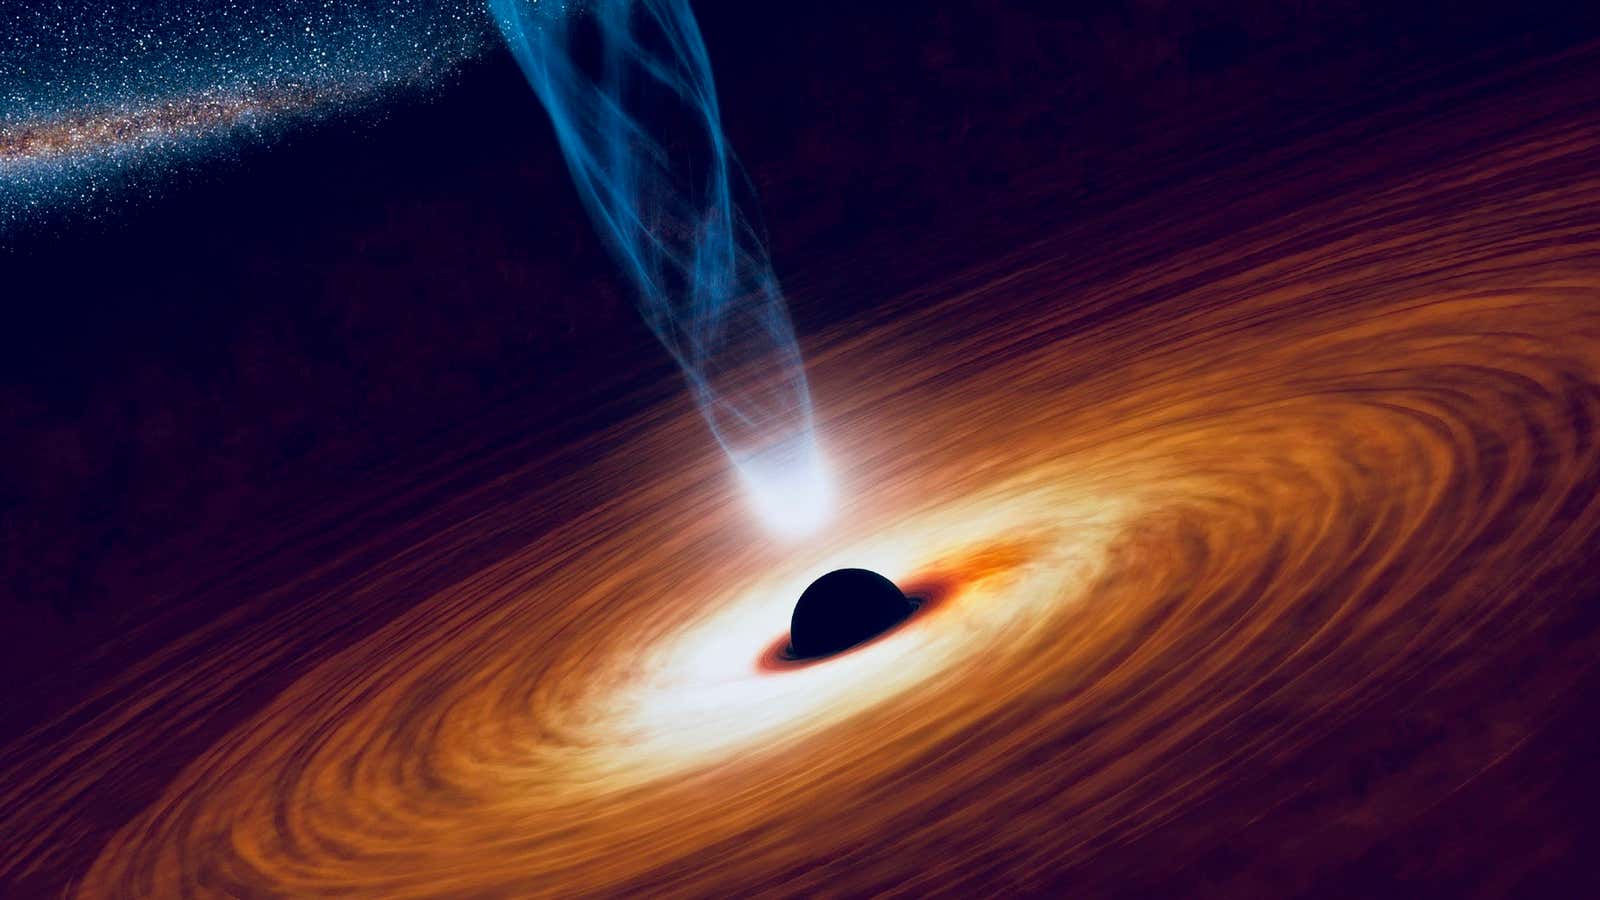 An artist’s rendering of a black hole.